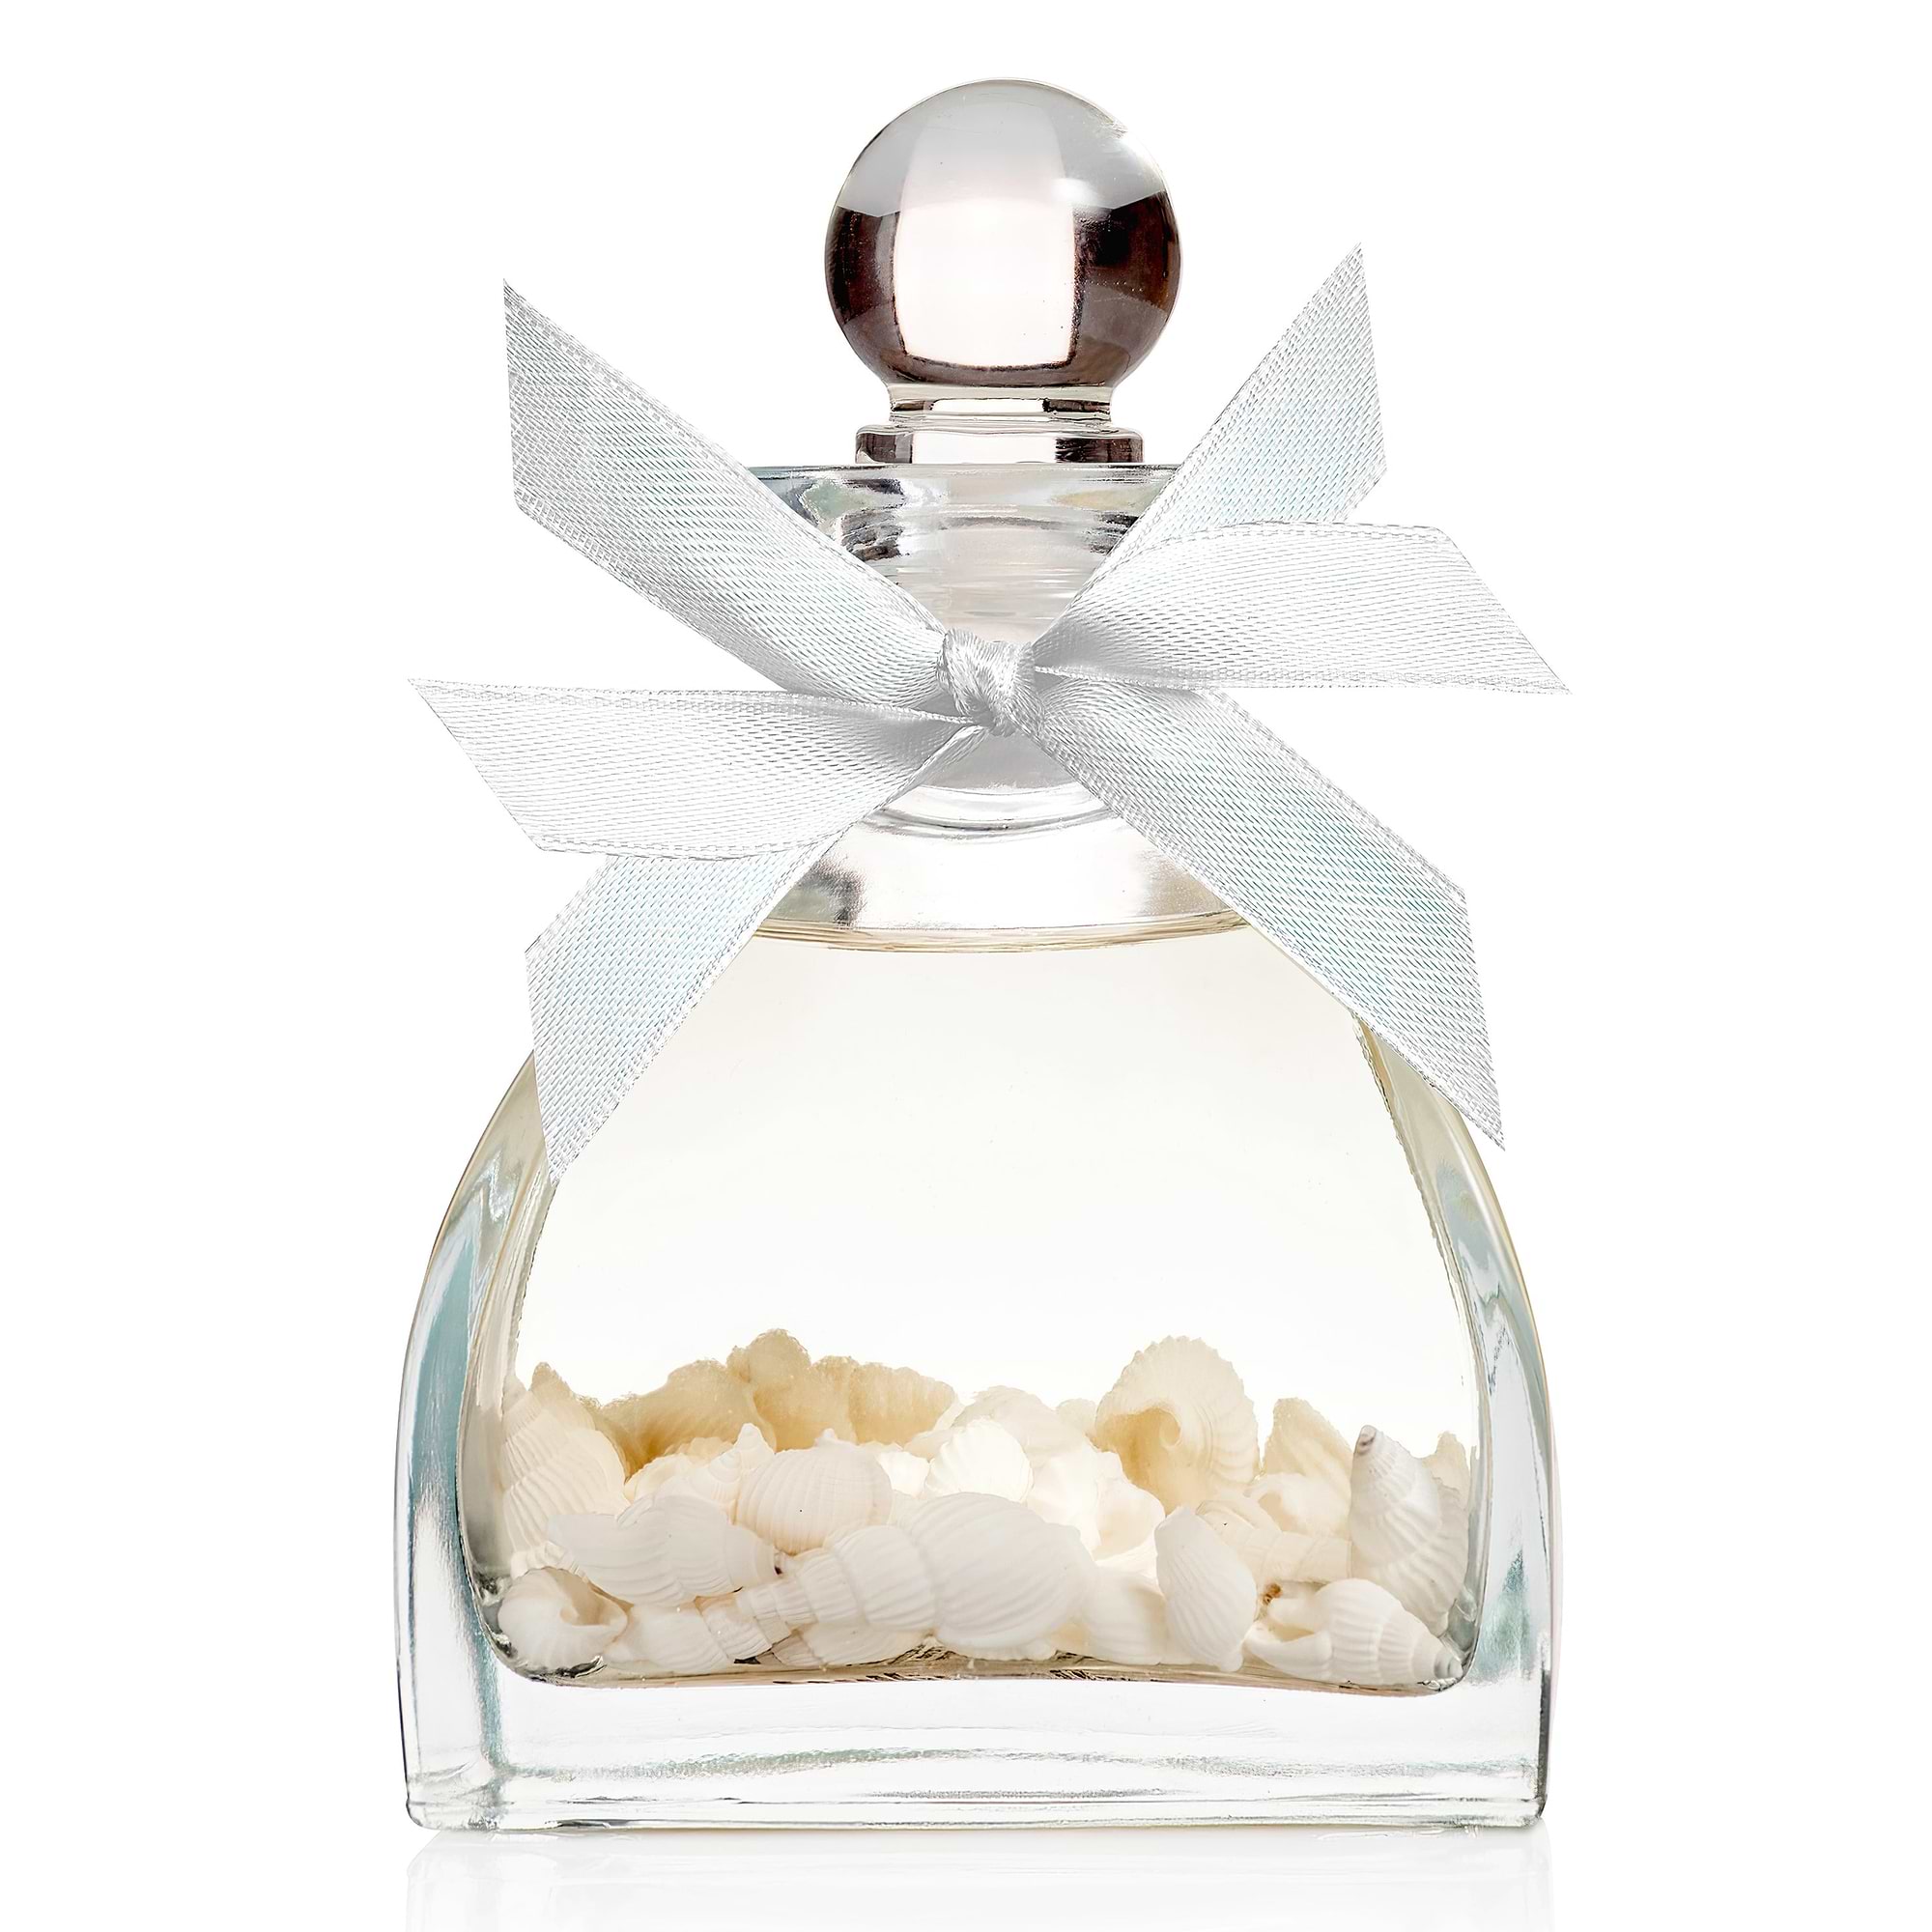 SPRING Fragrance Reed Diffuser | Large 9.47oz | Fragrance Made in France with Best Ingredients | Sea Shells design with White Flower fragrance. Ethanol free - VOC Compliant